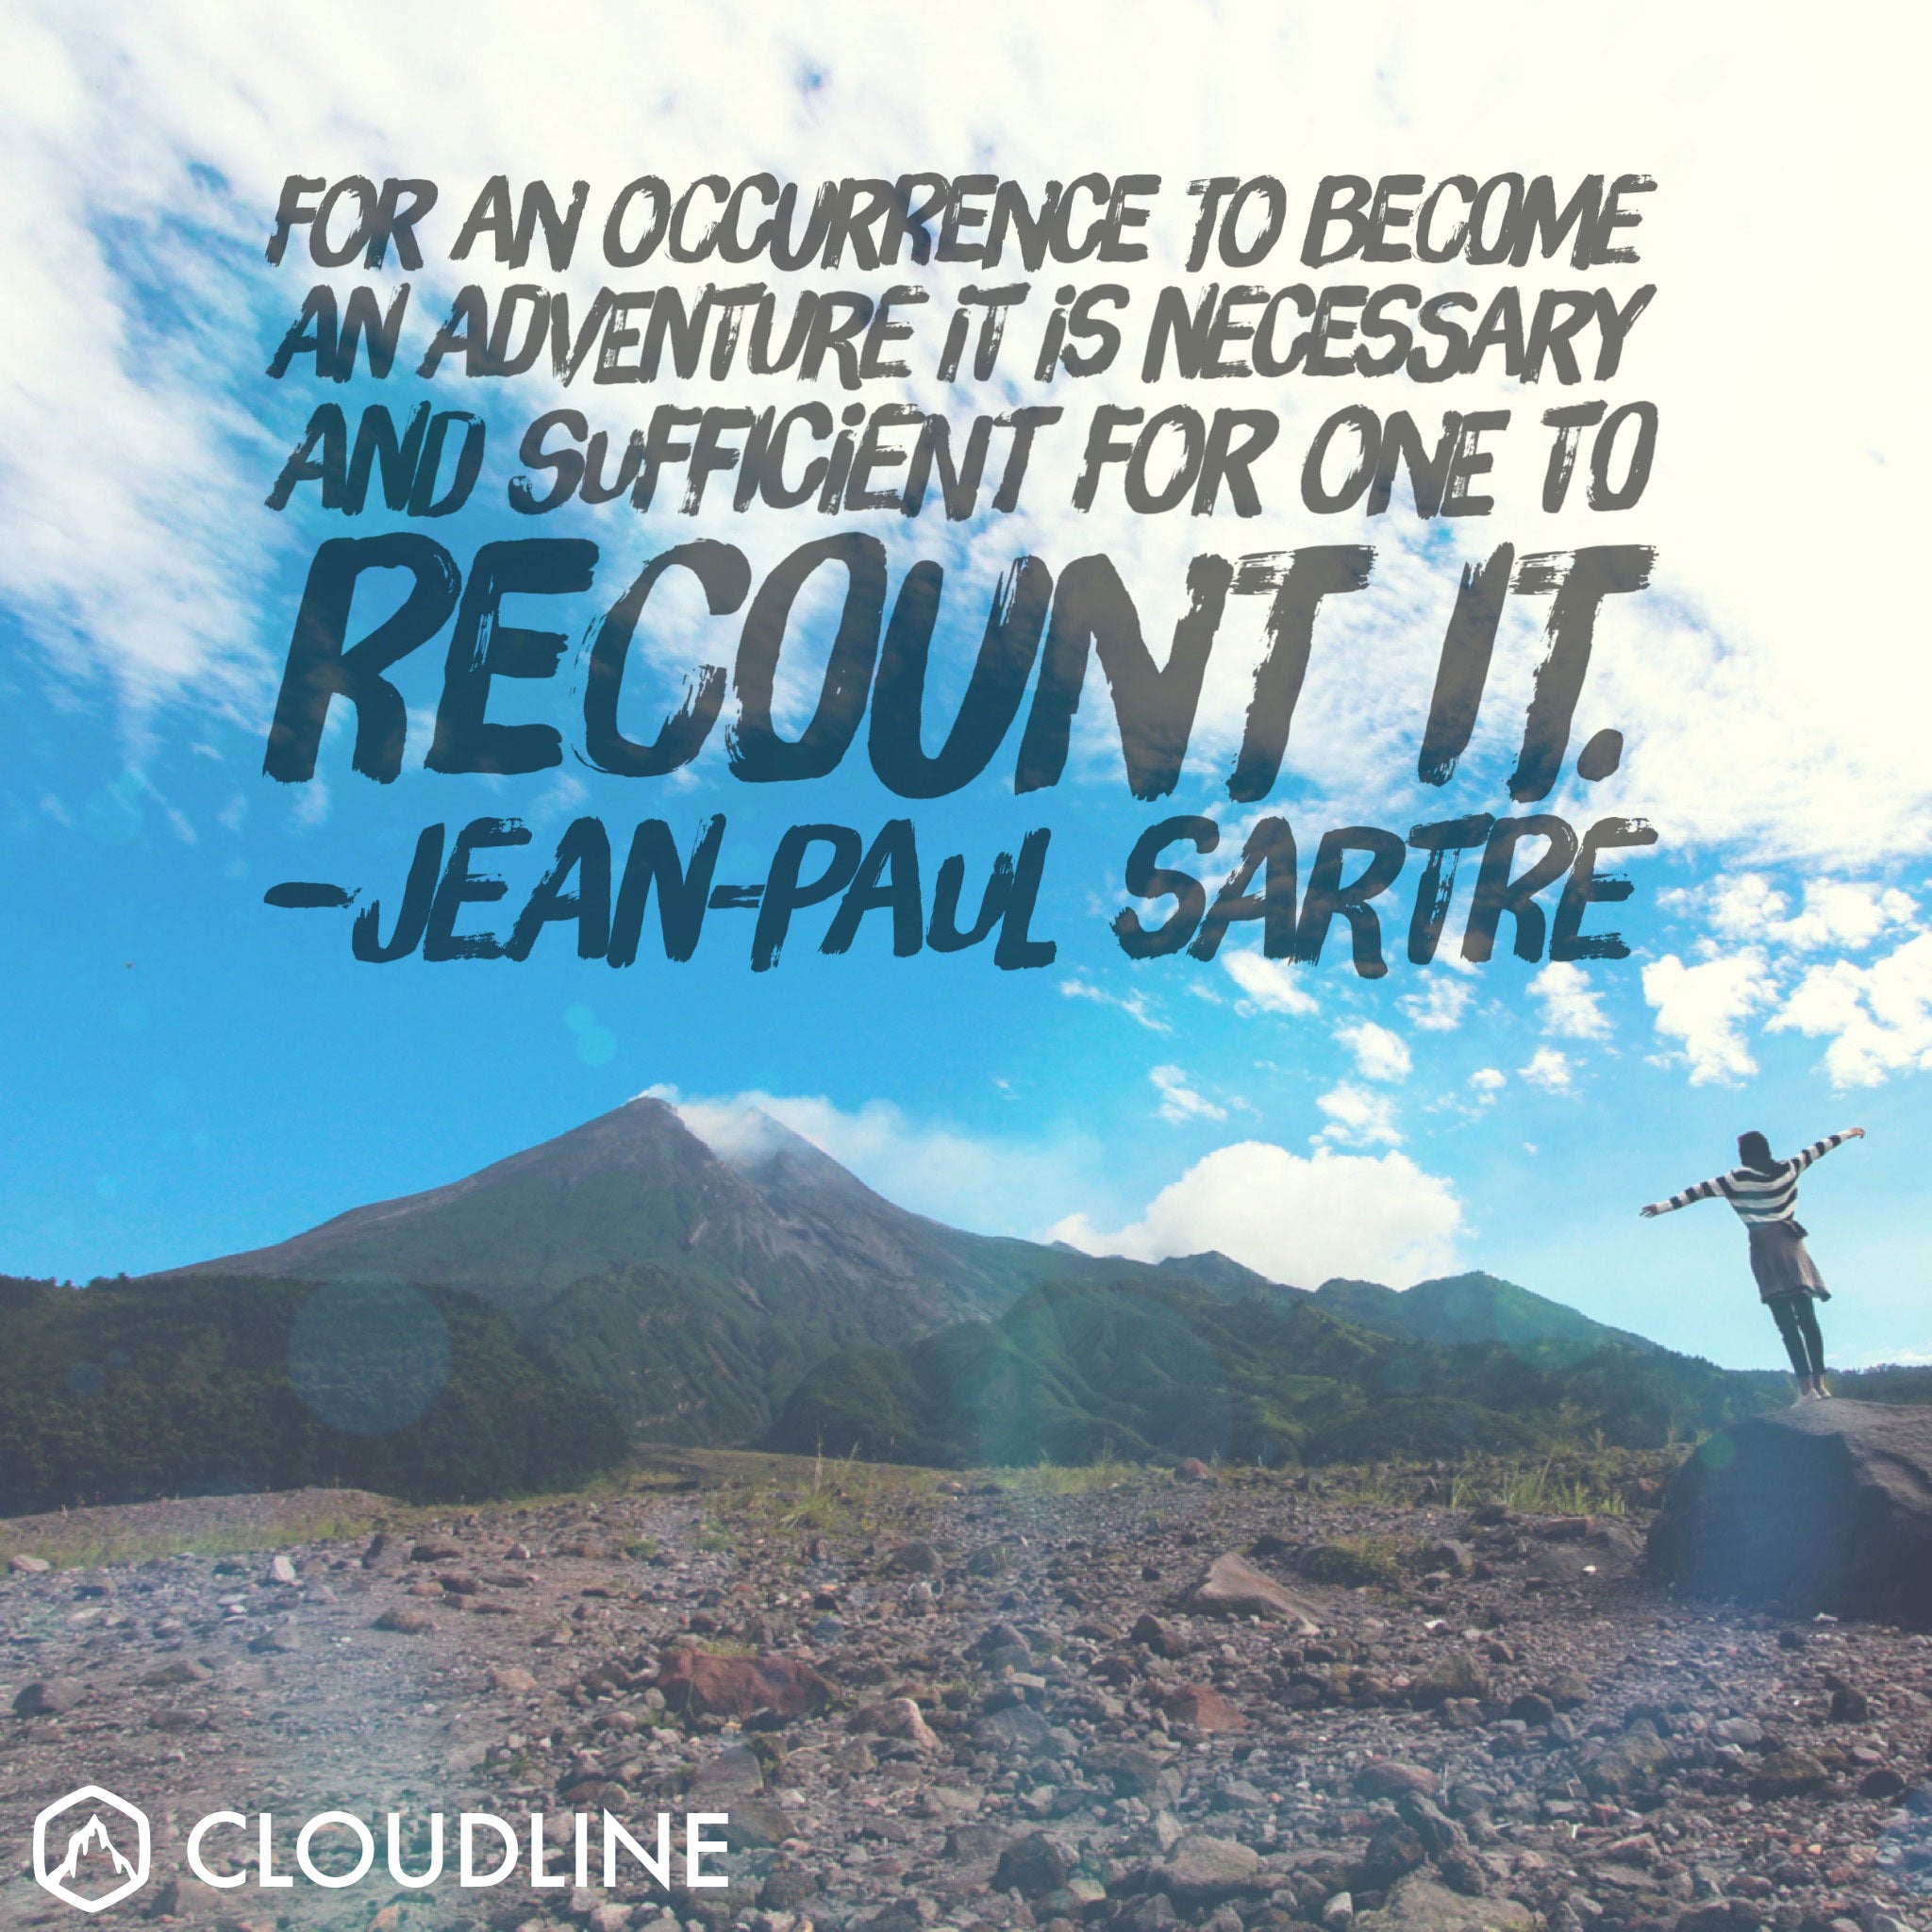 "For an occurrence to become an adventure it is necessary and sufficient for one to recount it." - Jean-Paul Sartre